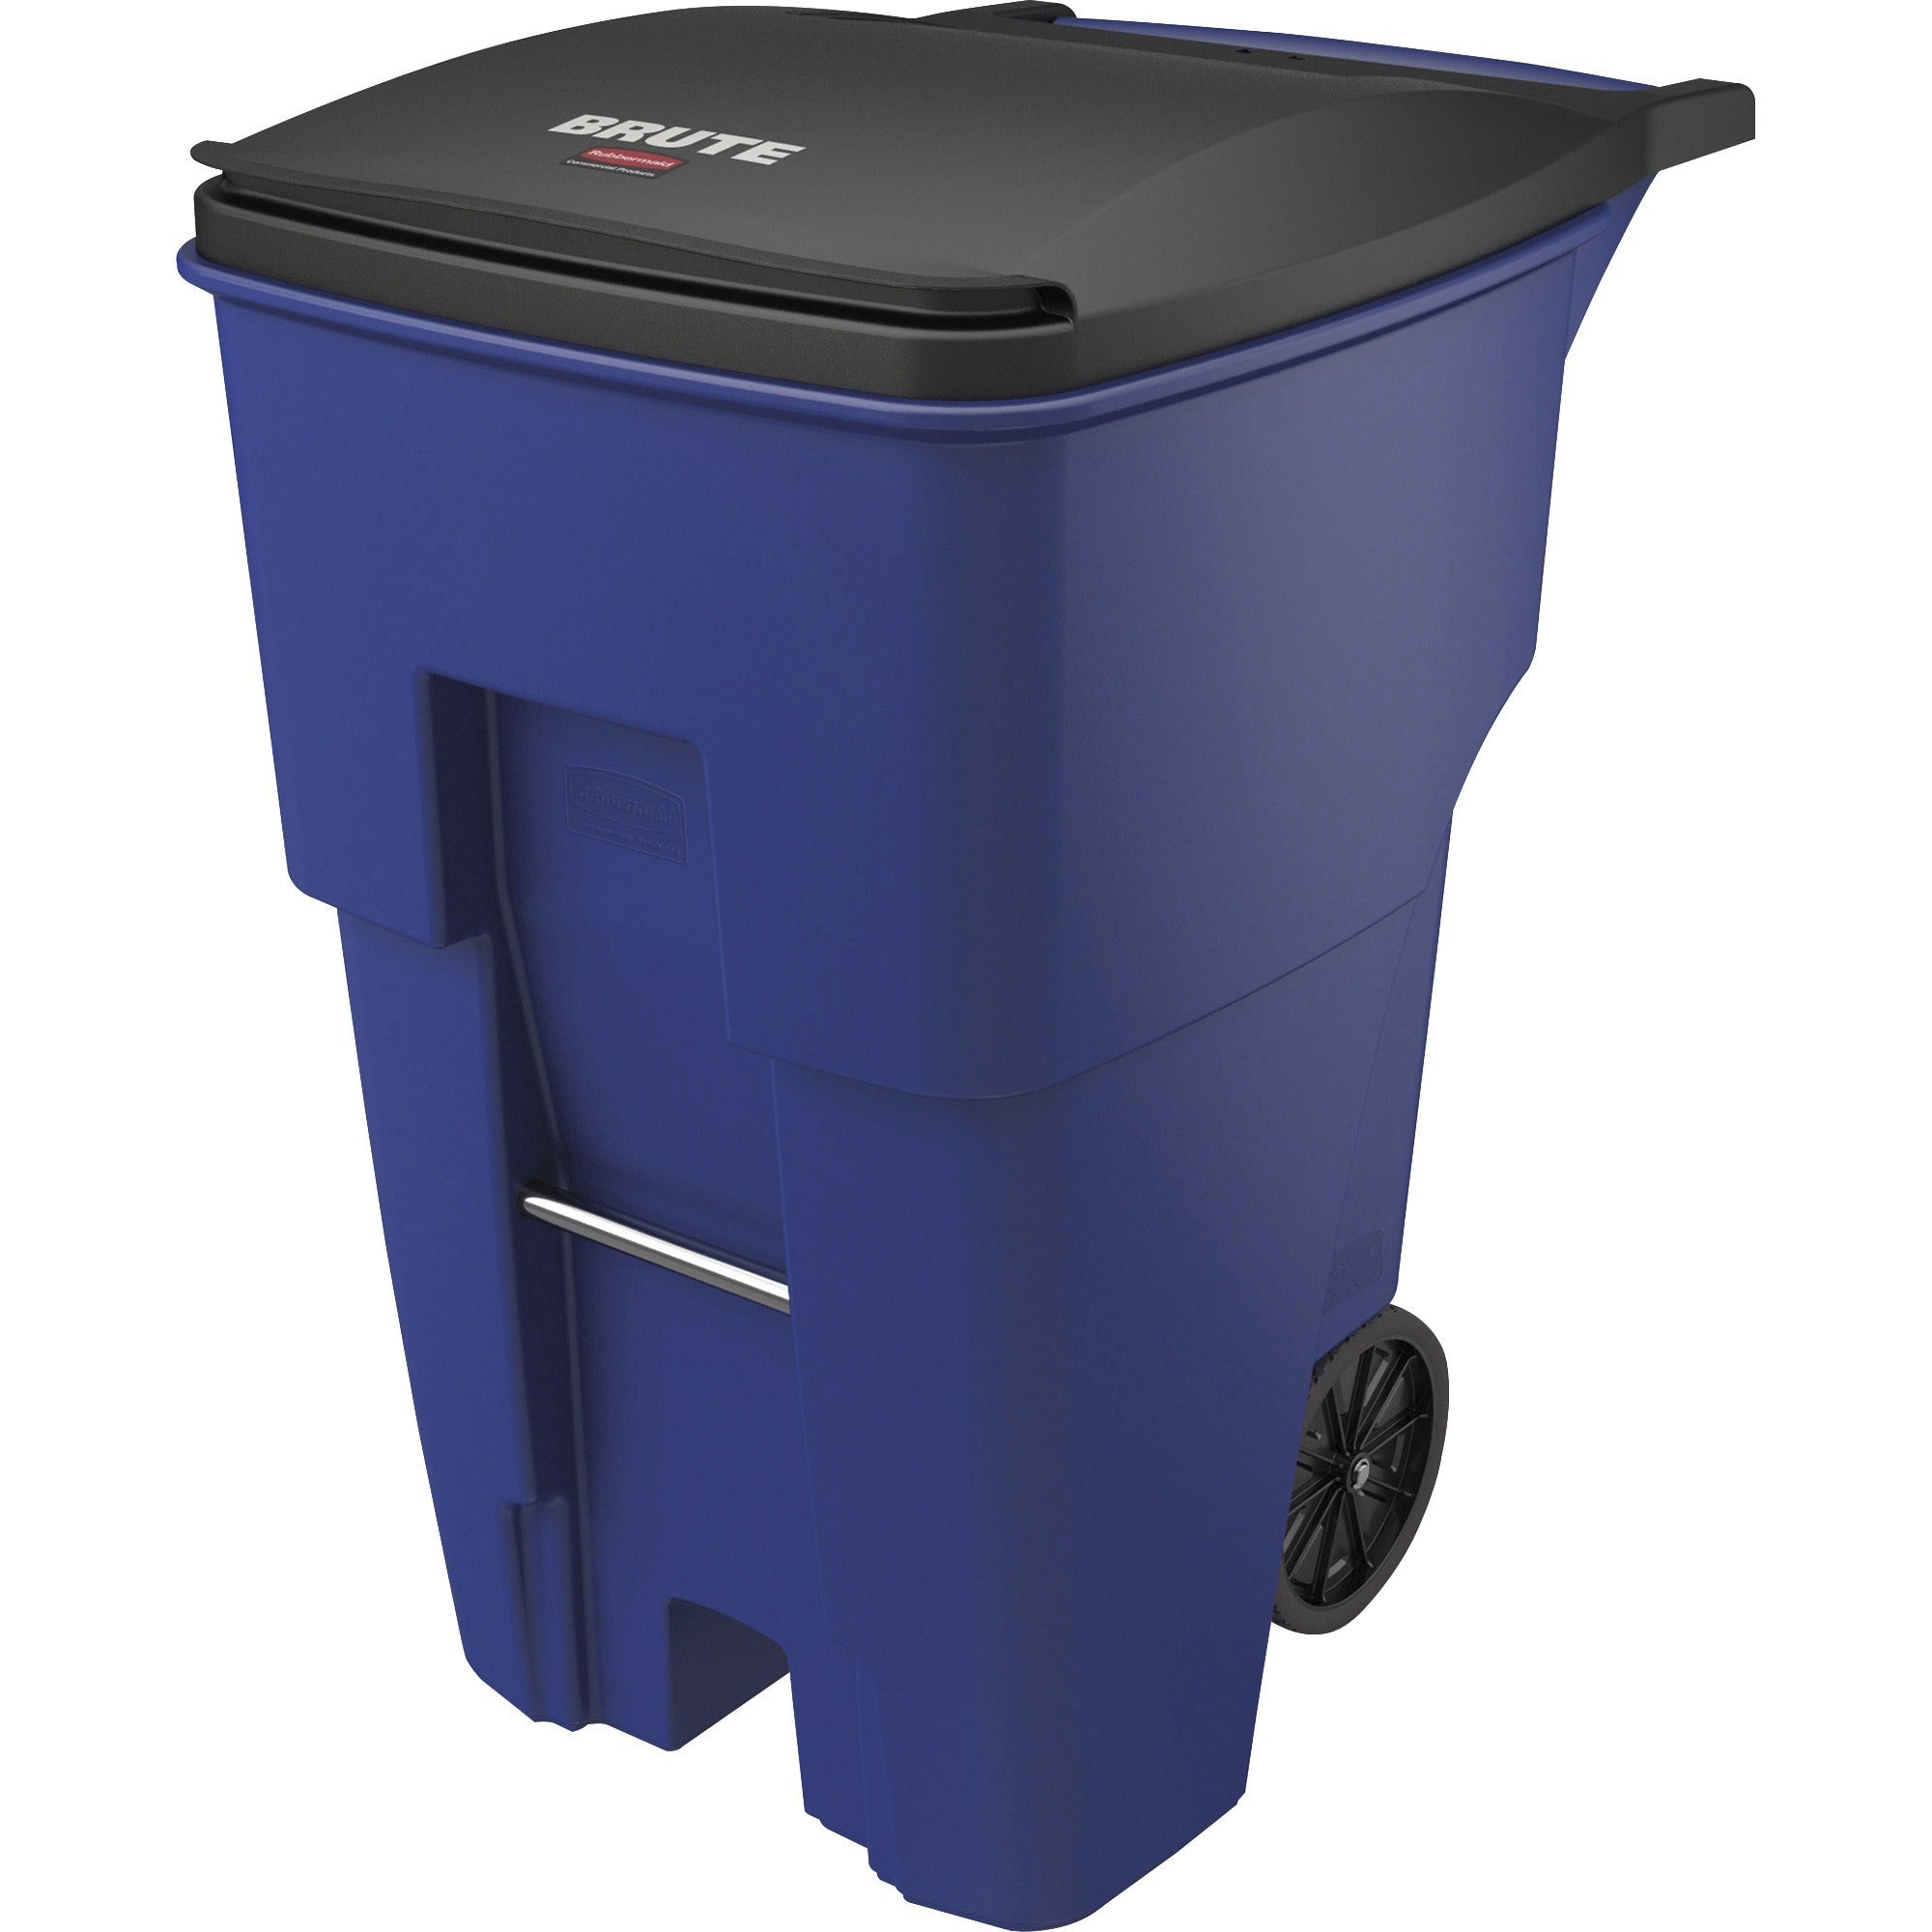 rubbermaid-commercial-brute-95-gallon-rollout-container-rollout-lid-95-gal-capacity-mobility-heavy-duty-wheels-reinforced-smooth-ergonomic-handle-uv-resistant-46-height-x-372-width-x-286-depth-blue-1-each_rcp9w2273blu - 1